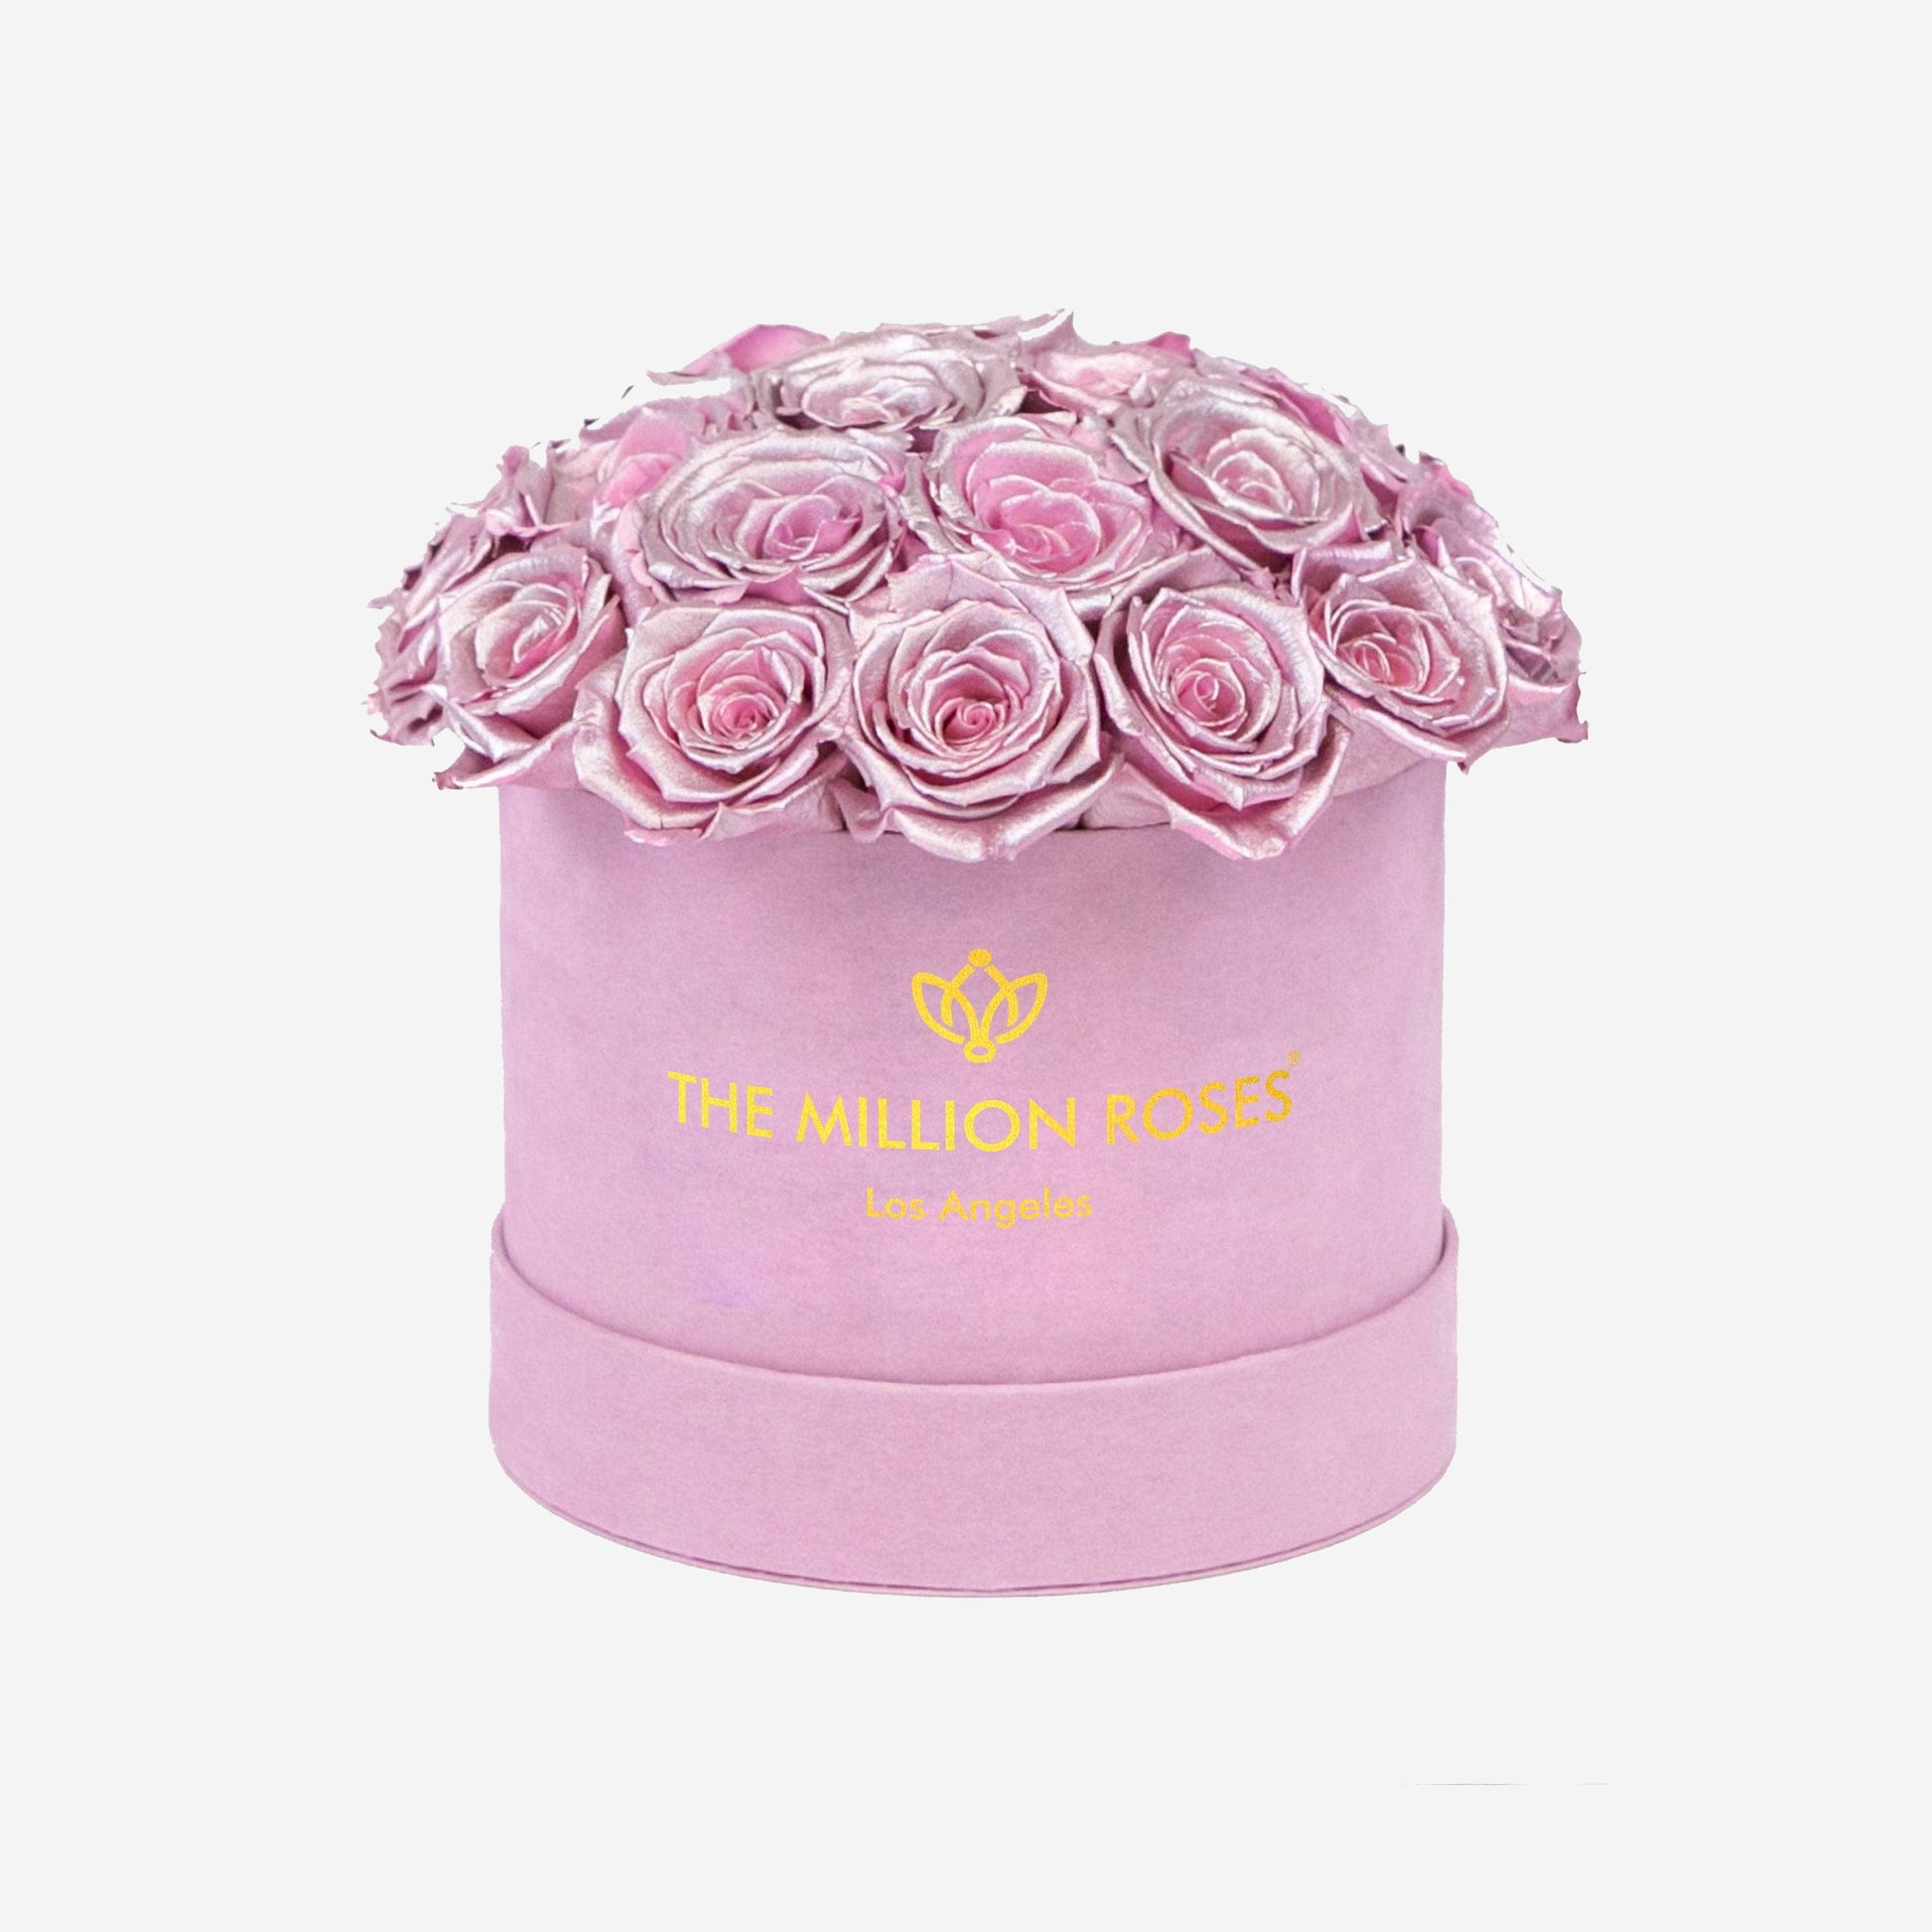 Classic Light Pink Suede Dome Box | Pink Gold Roses - The Million Roses